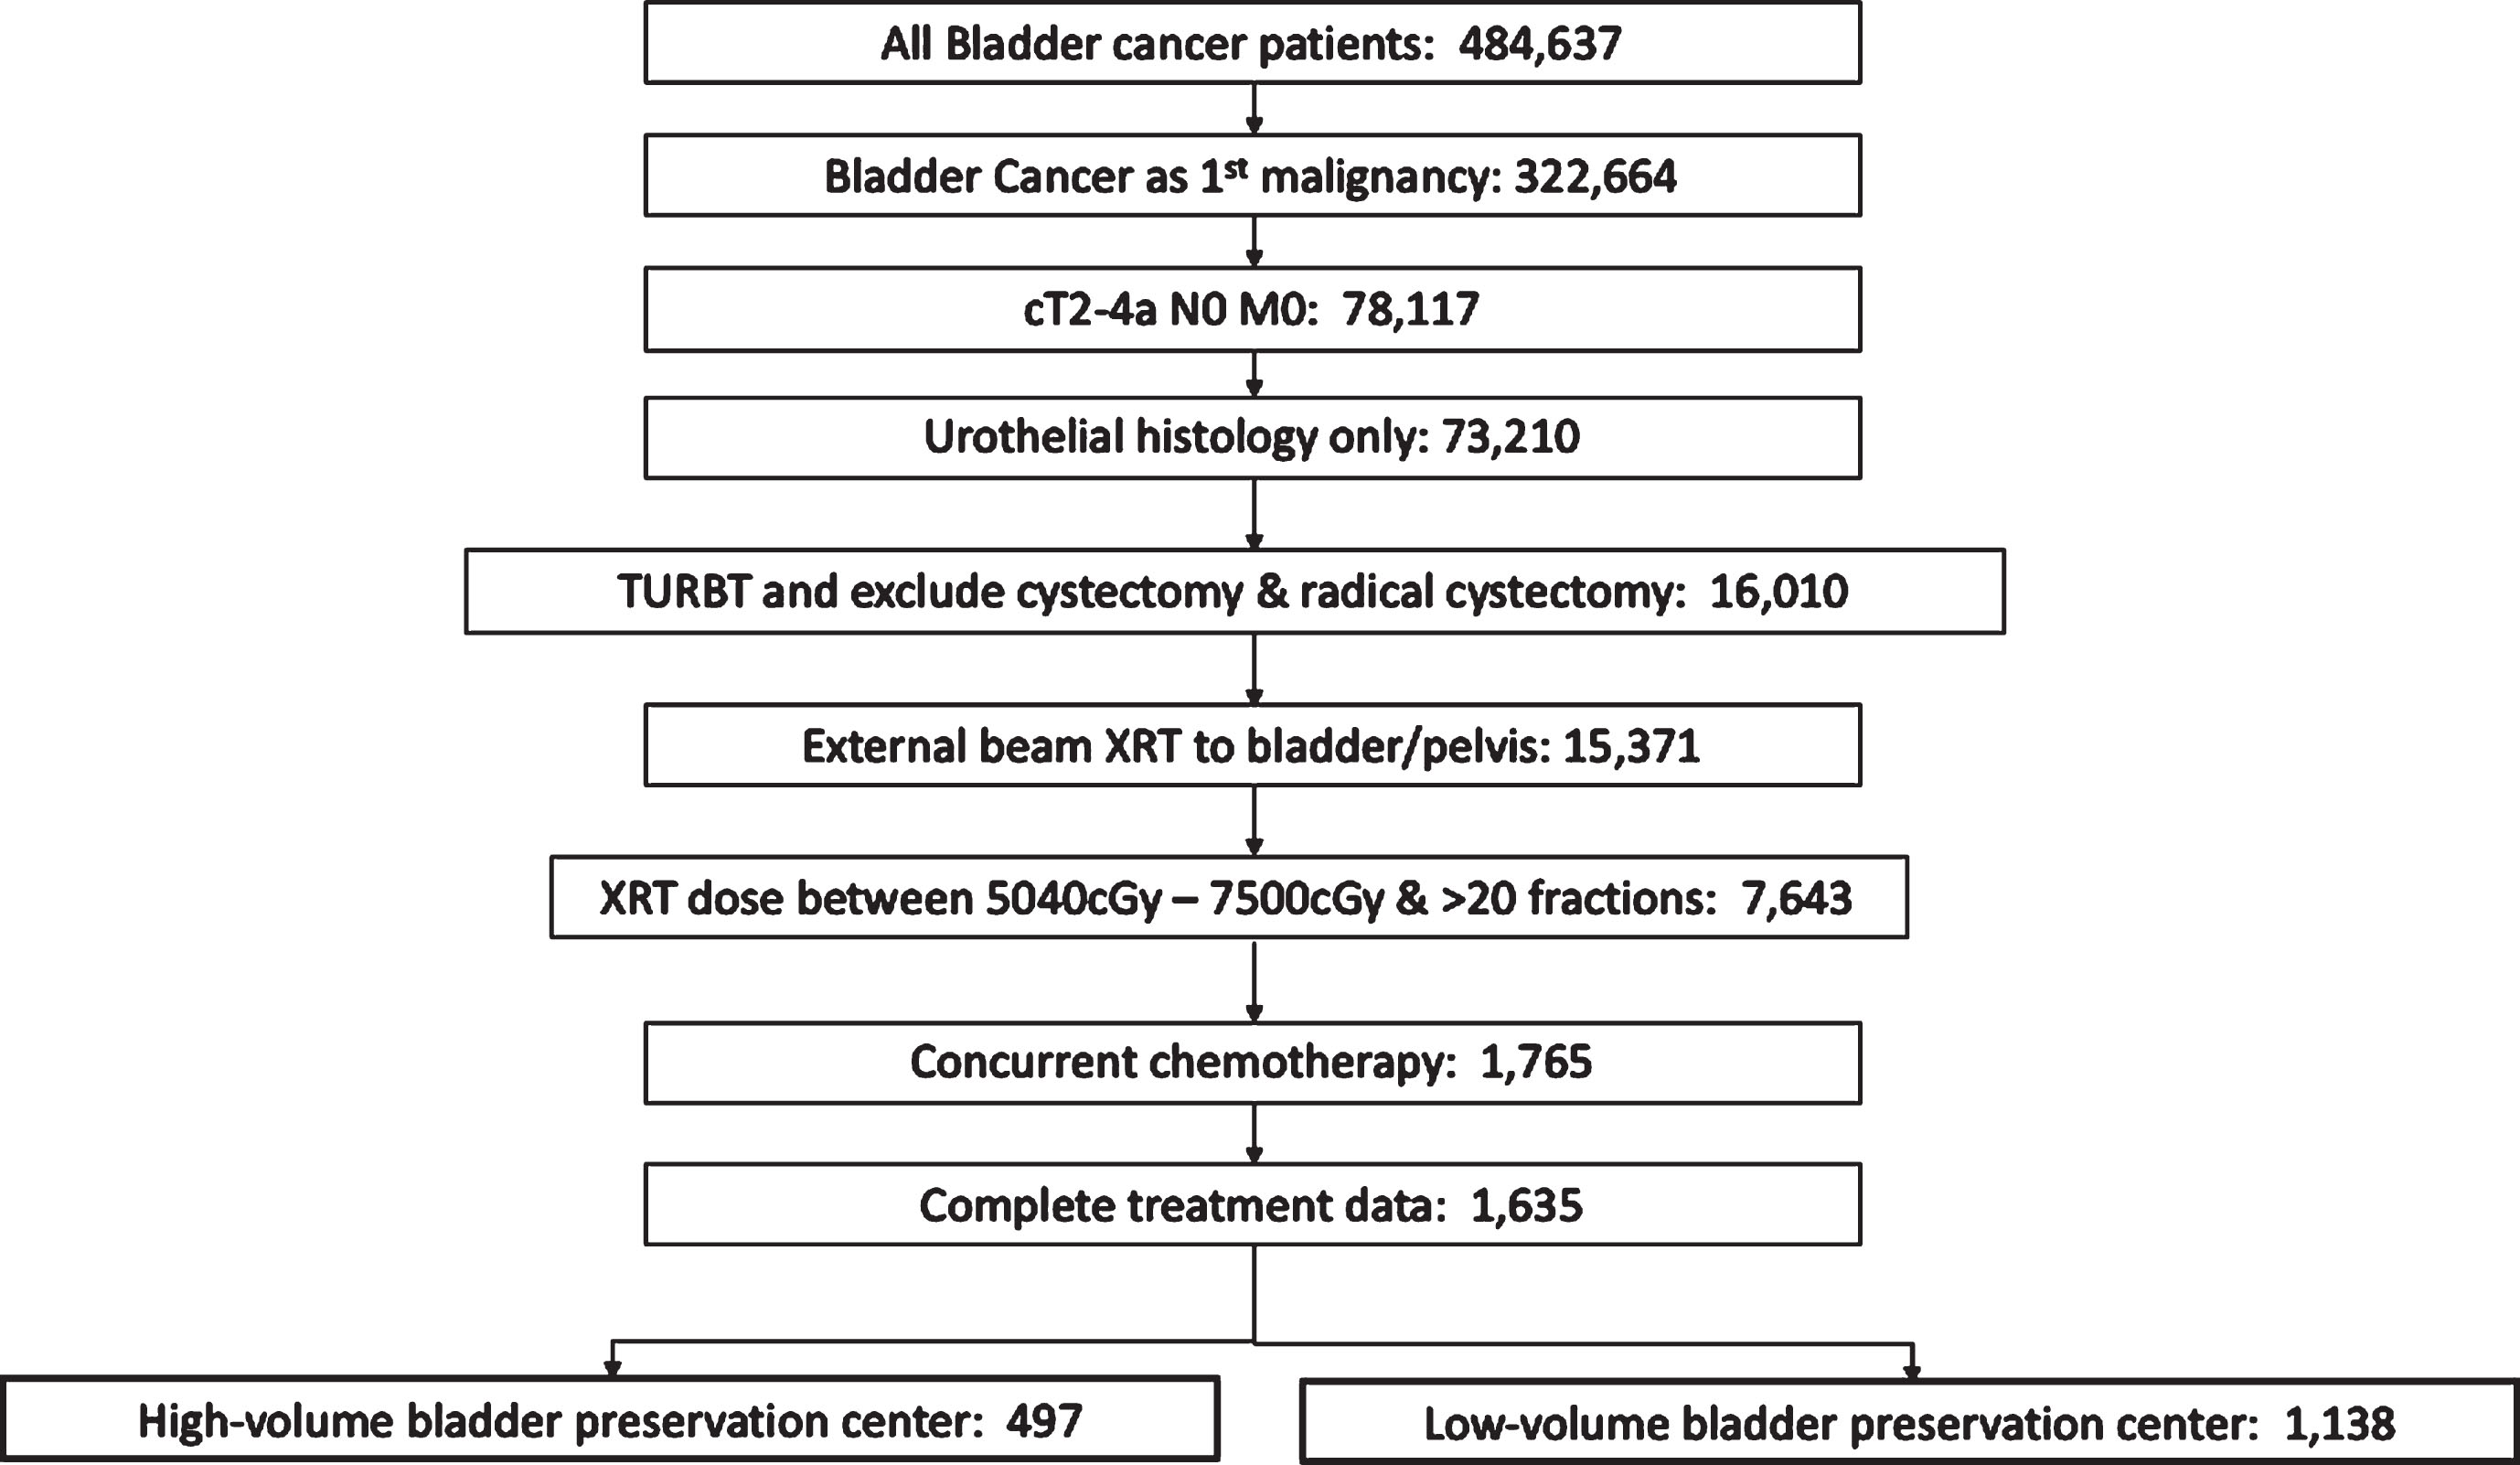 Consort diagram of inclusion and exclusion criteria. TURBT, transurethral resection of bladder tumor; XRT, radiation therapy.